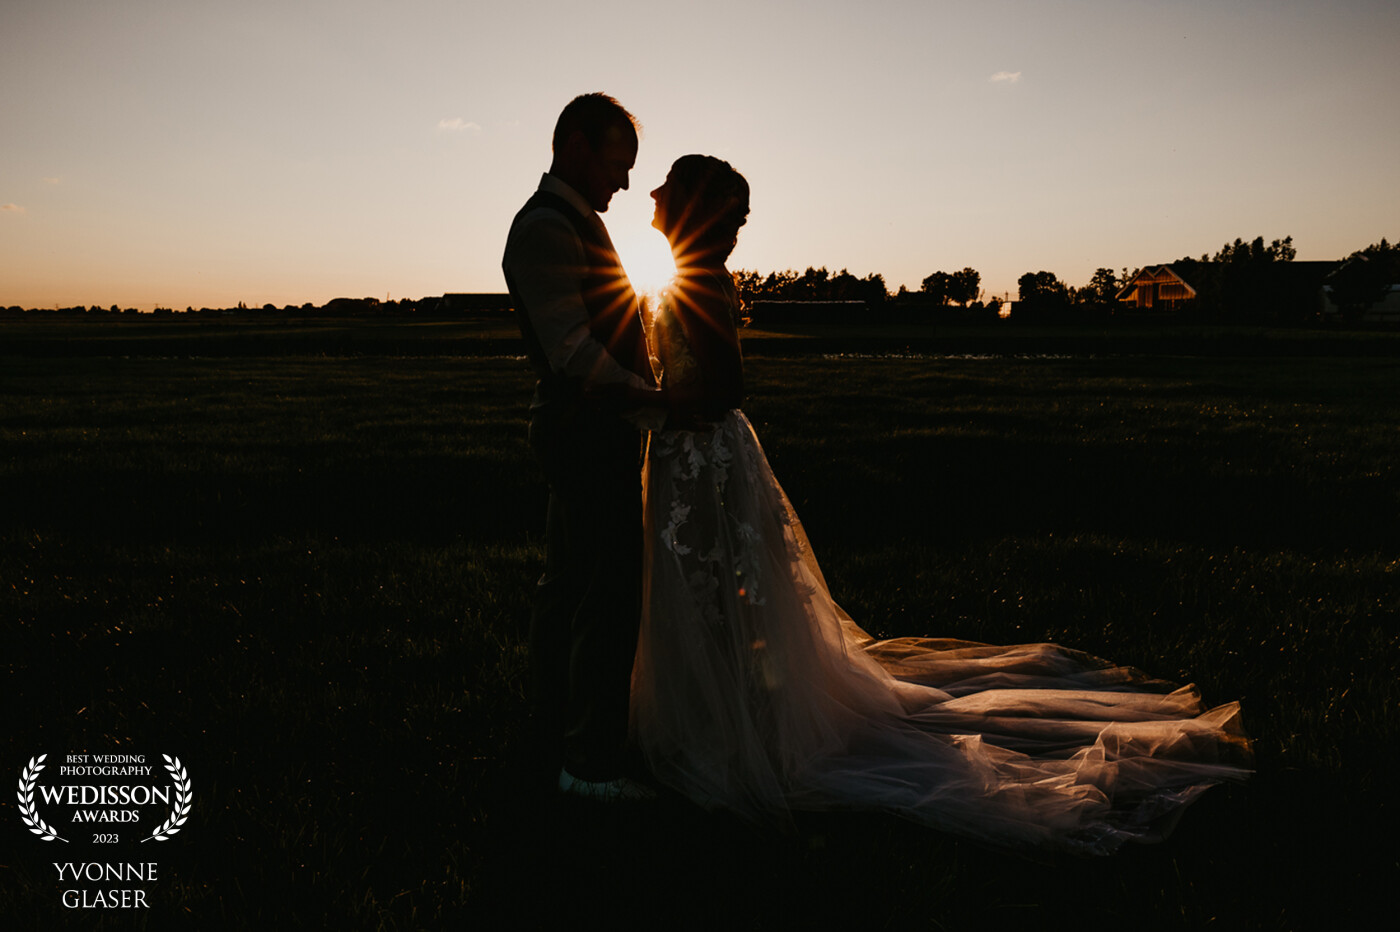 Erik and Suze got married in the family field where Suze used to come as a little girl. They put a lot of effort into creating a relaxed festival atmosphere. As a wedding photographer, when I see a beautiful golden hour coming, I briefly take the love couple away from their guests for these fantastic images.